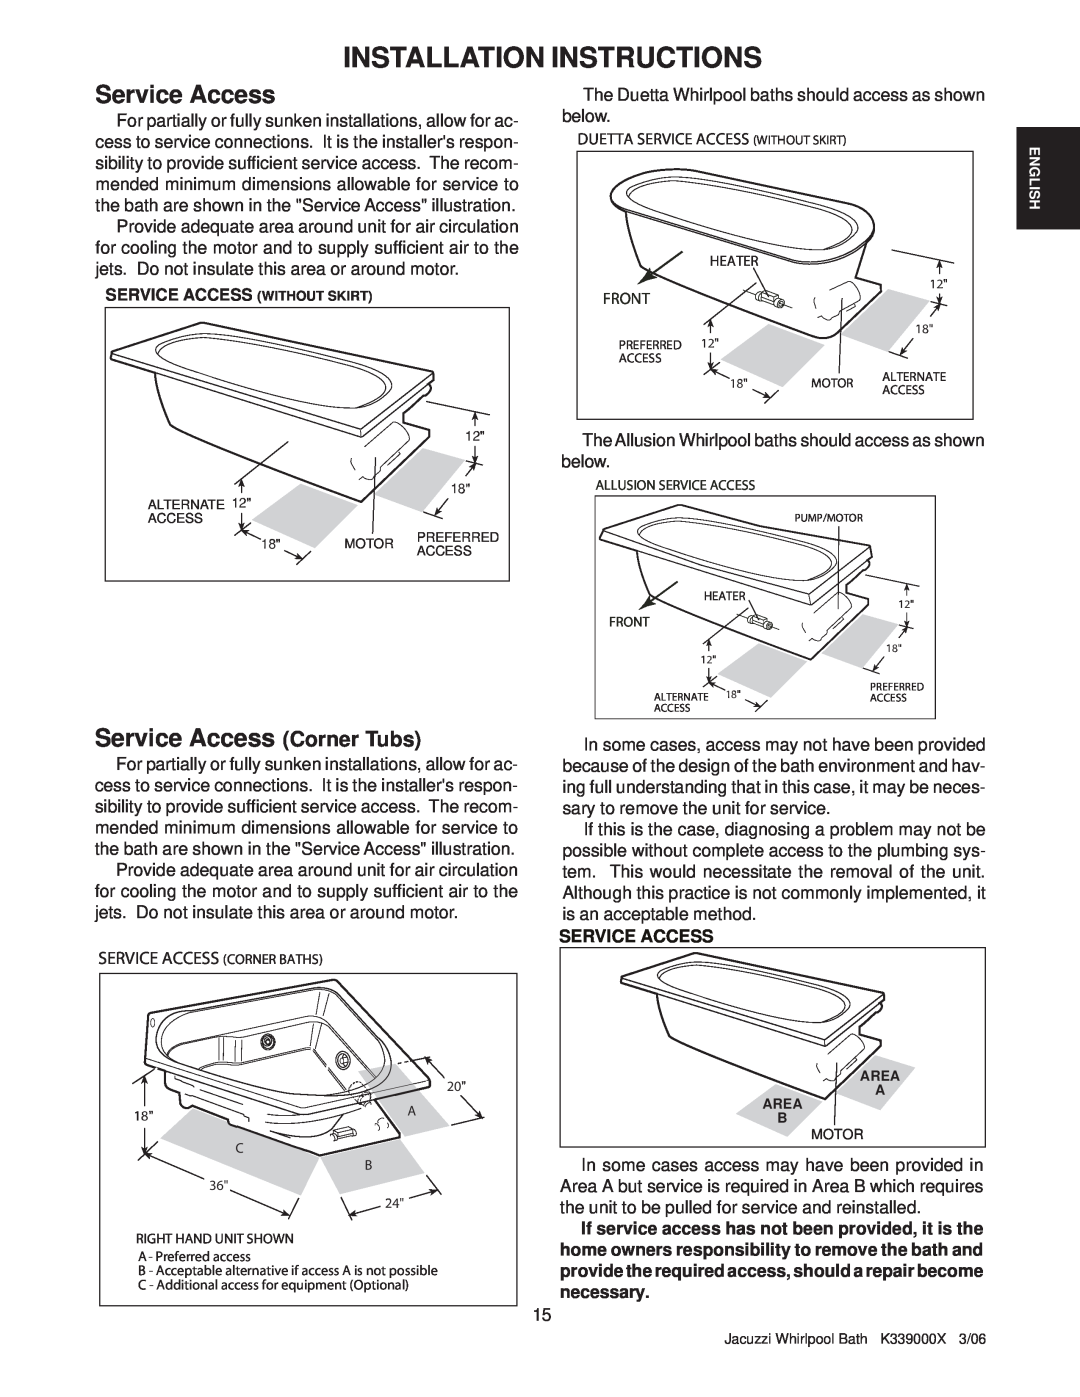 Jacuzzi K339000X manual Service Access Corner Tubs, Installation Instructions, Service Access Without Skirt 